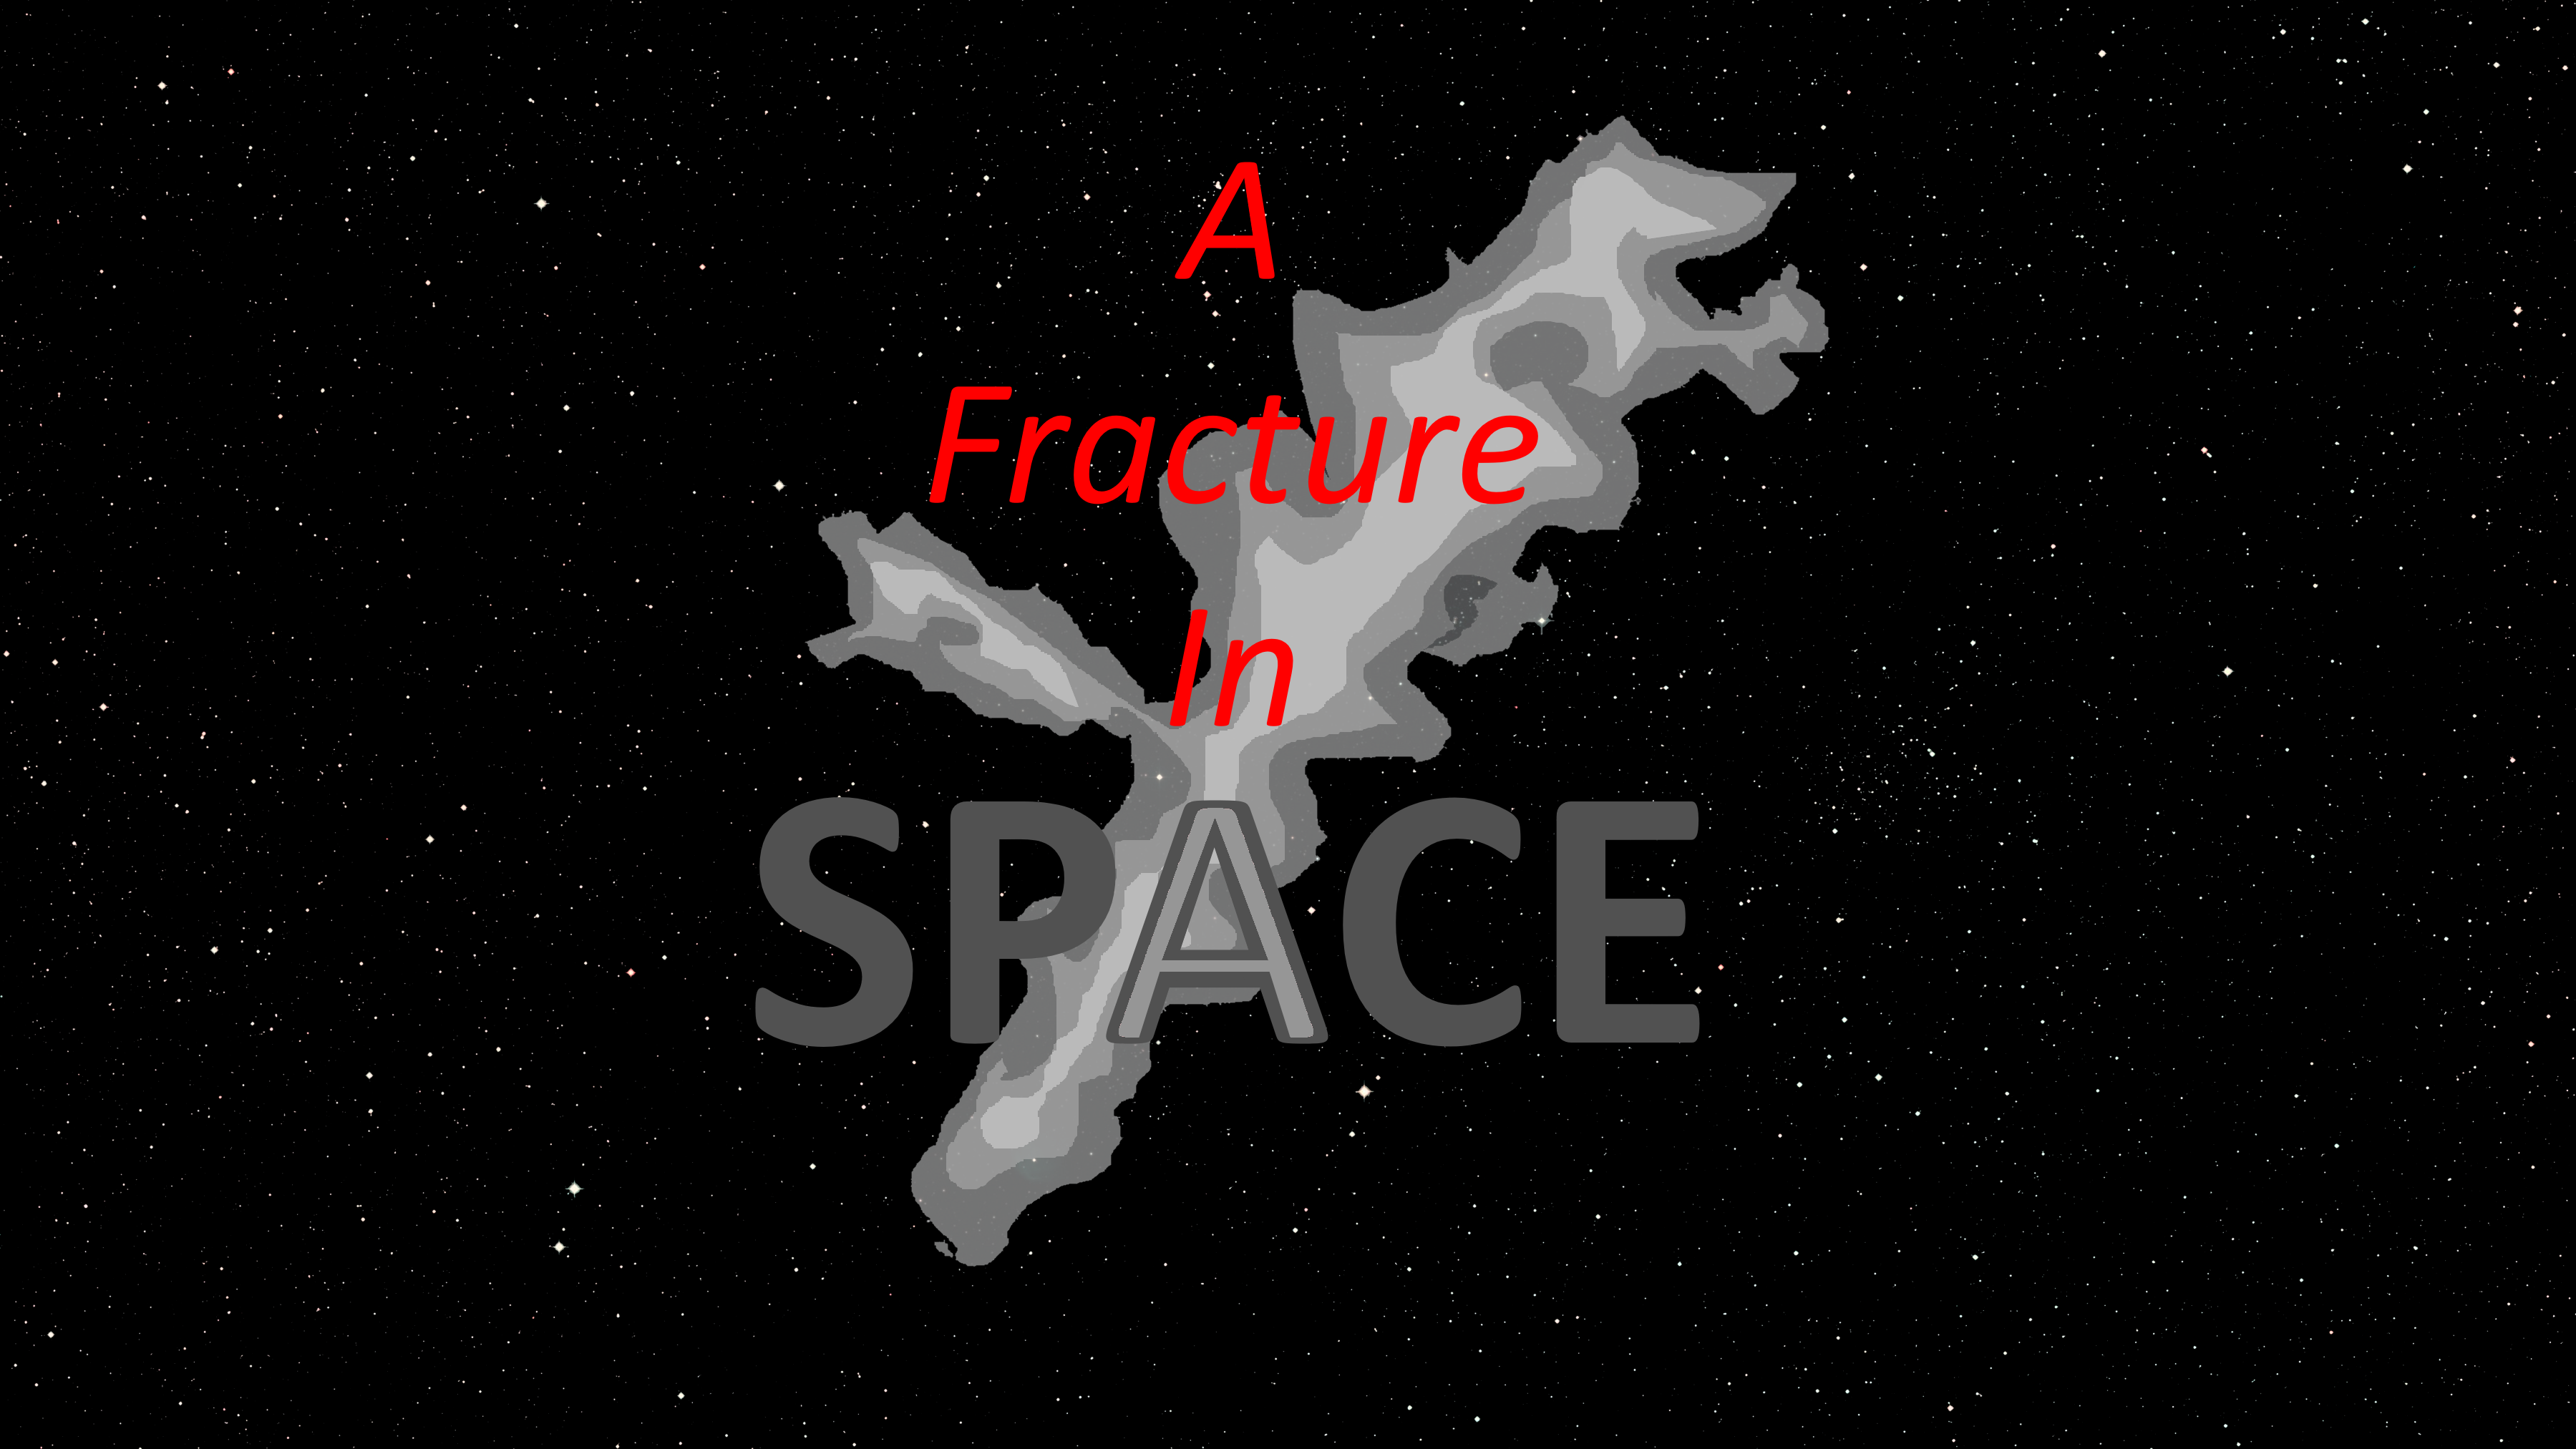 Download A Fracture in Space for Minecraft 1.16.4